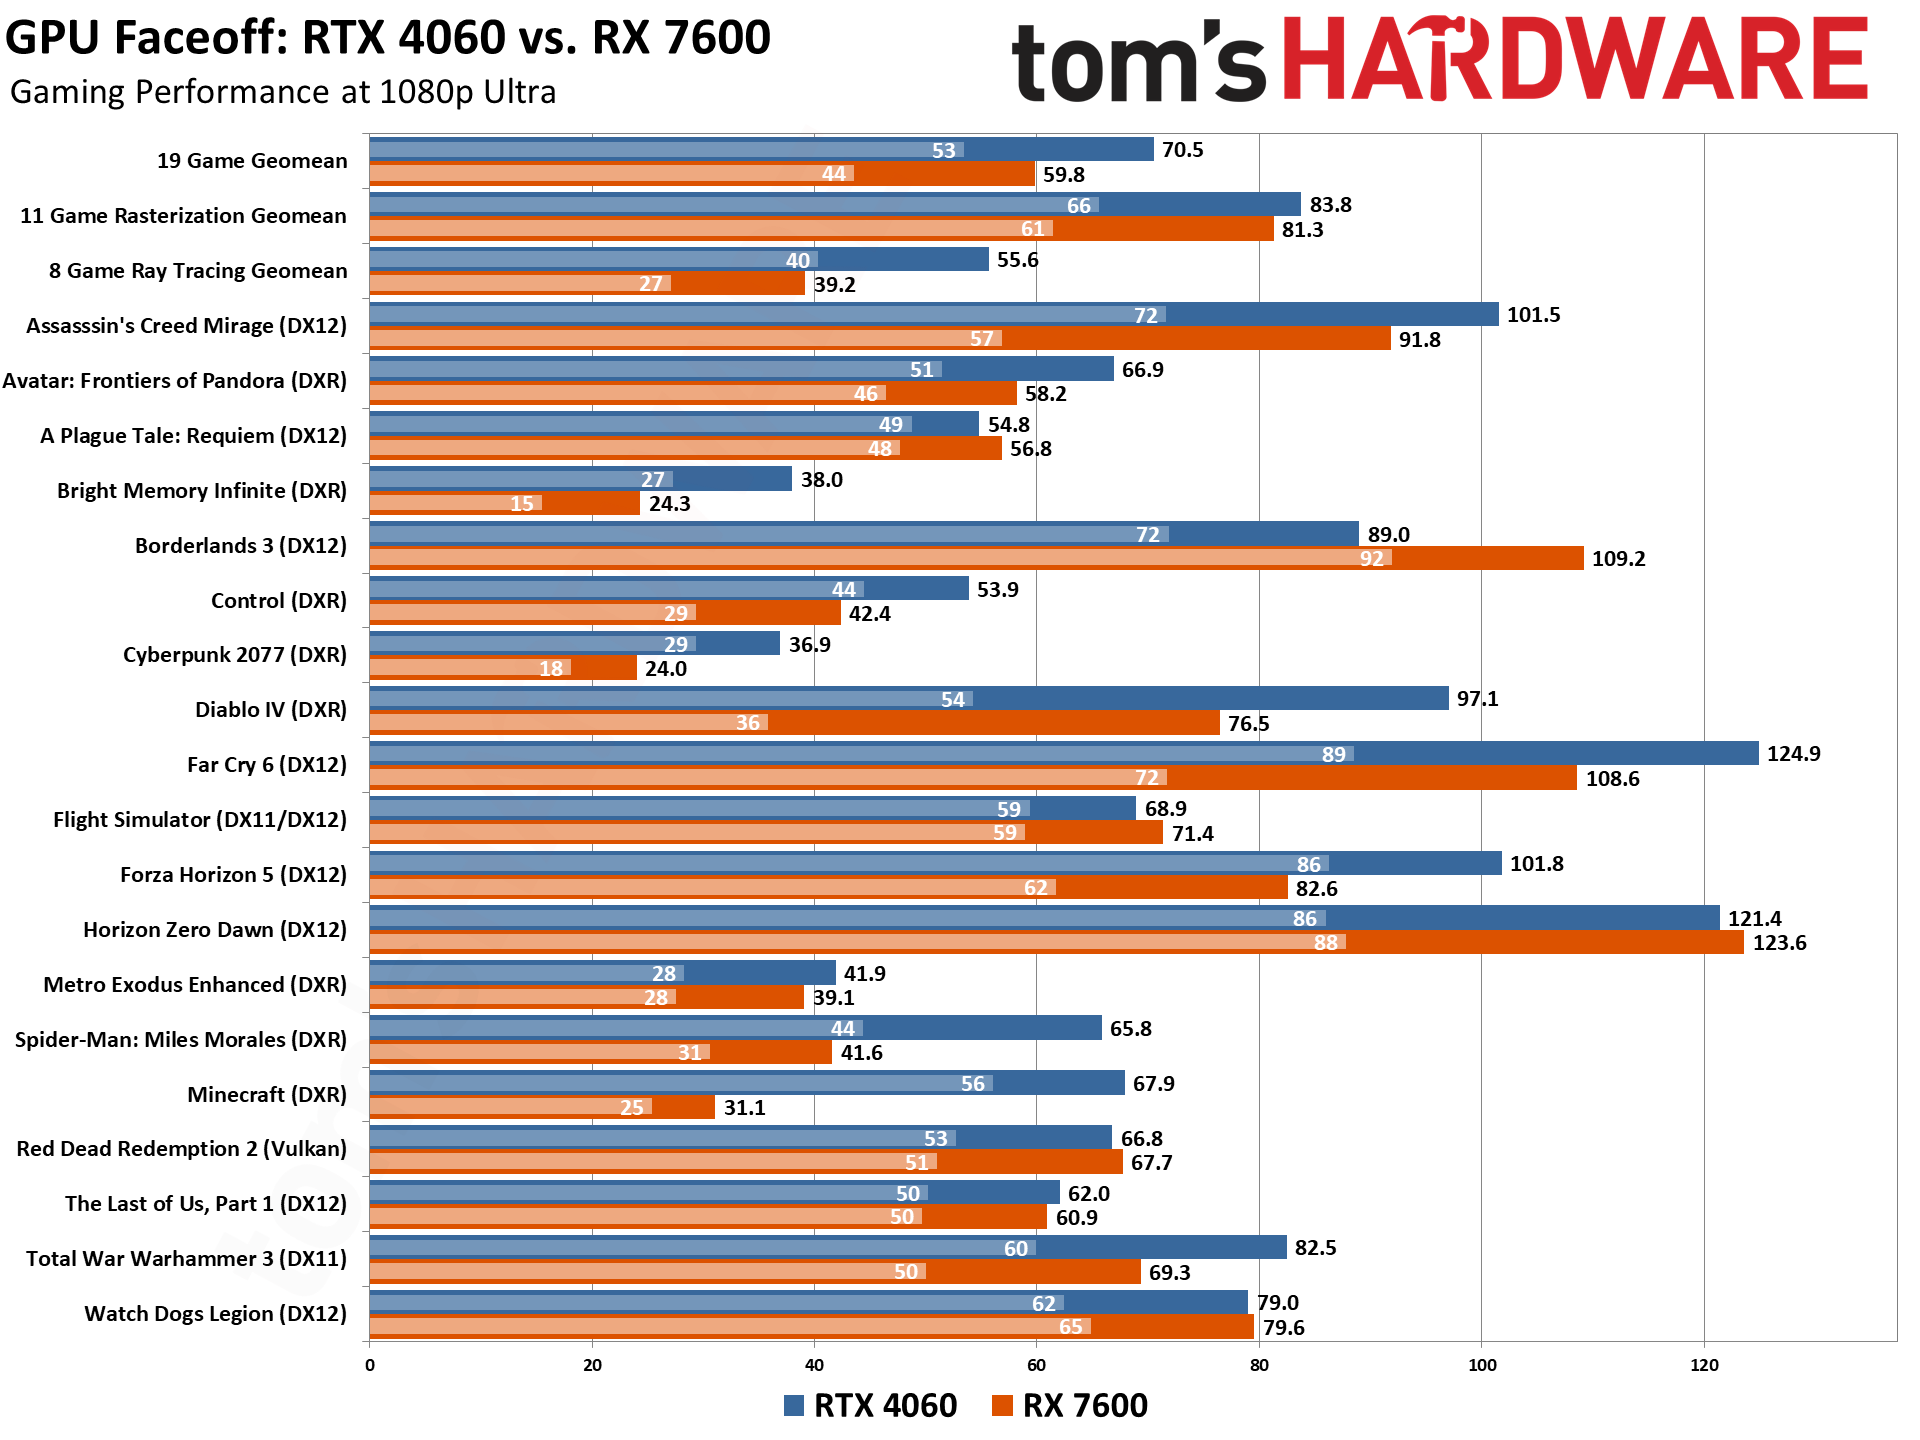 RTX 4060 vs RX 7600 Face Off - Gaming Benchmarks